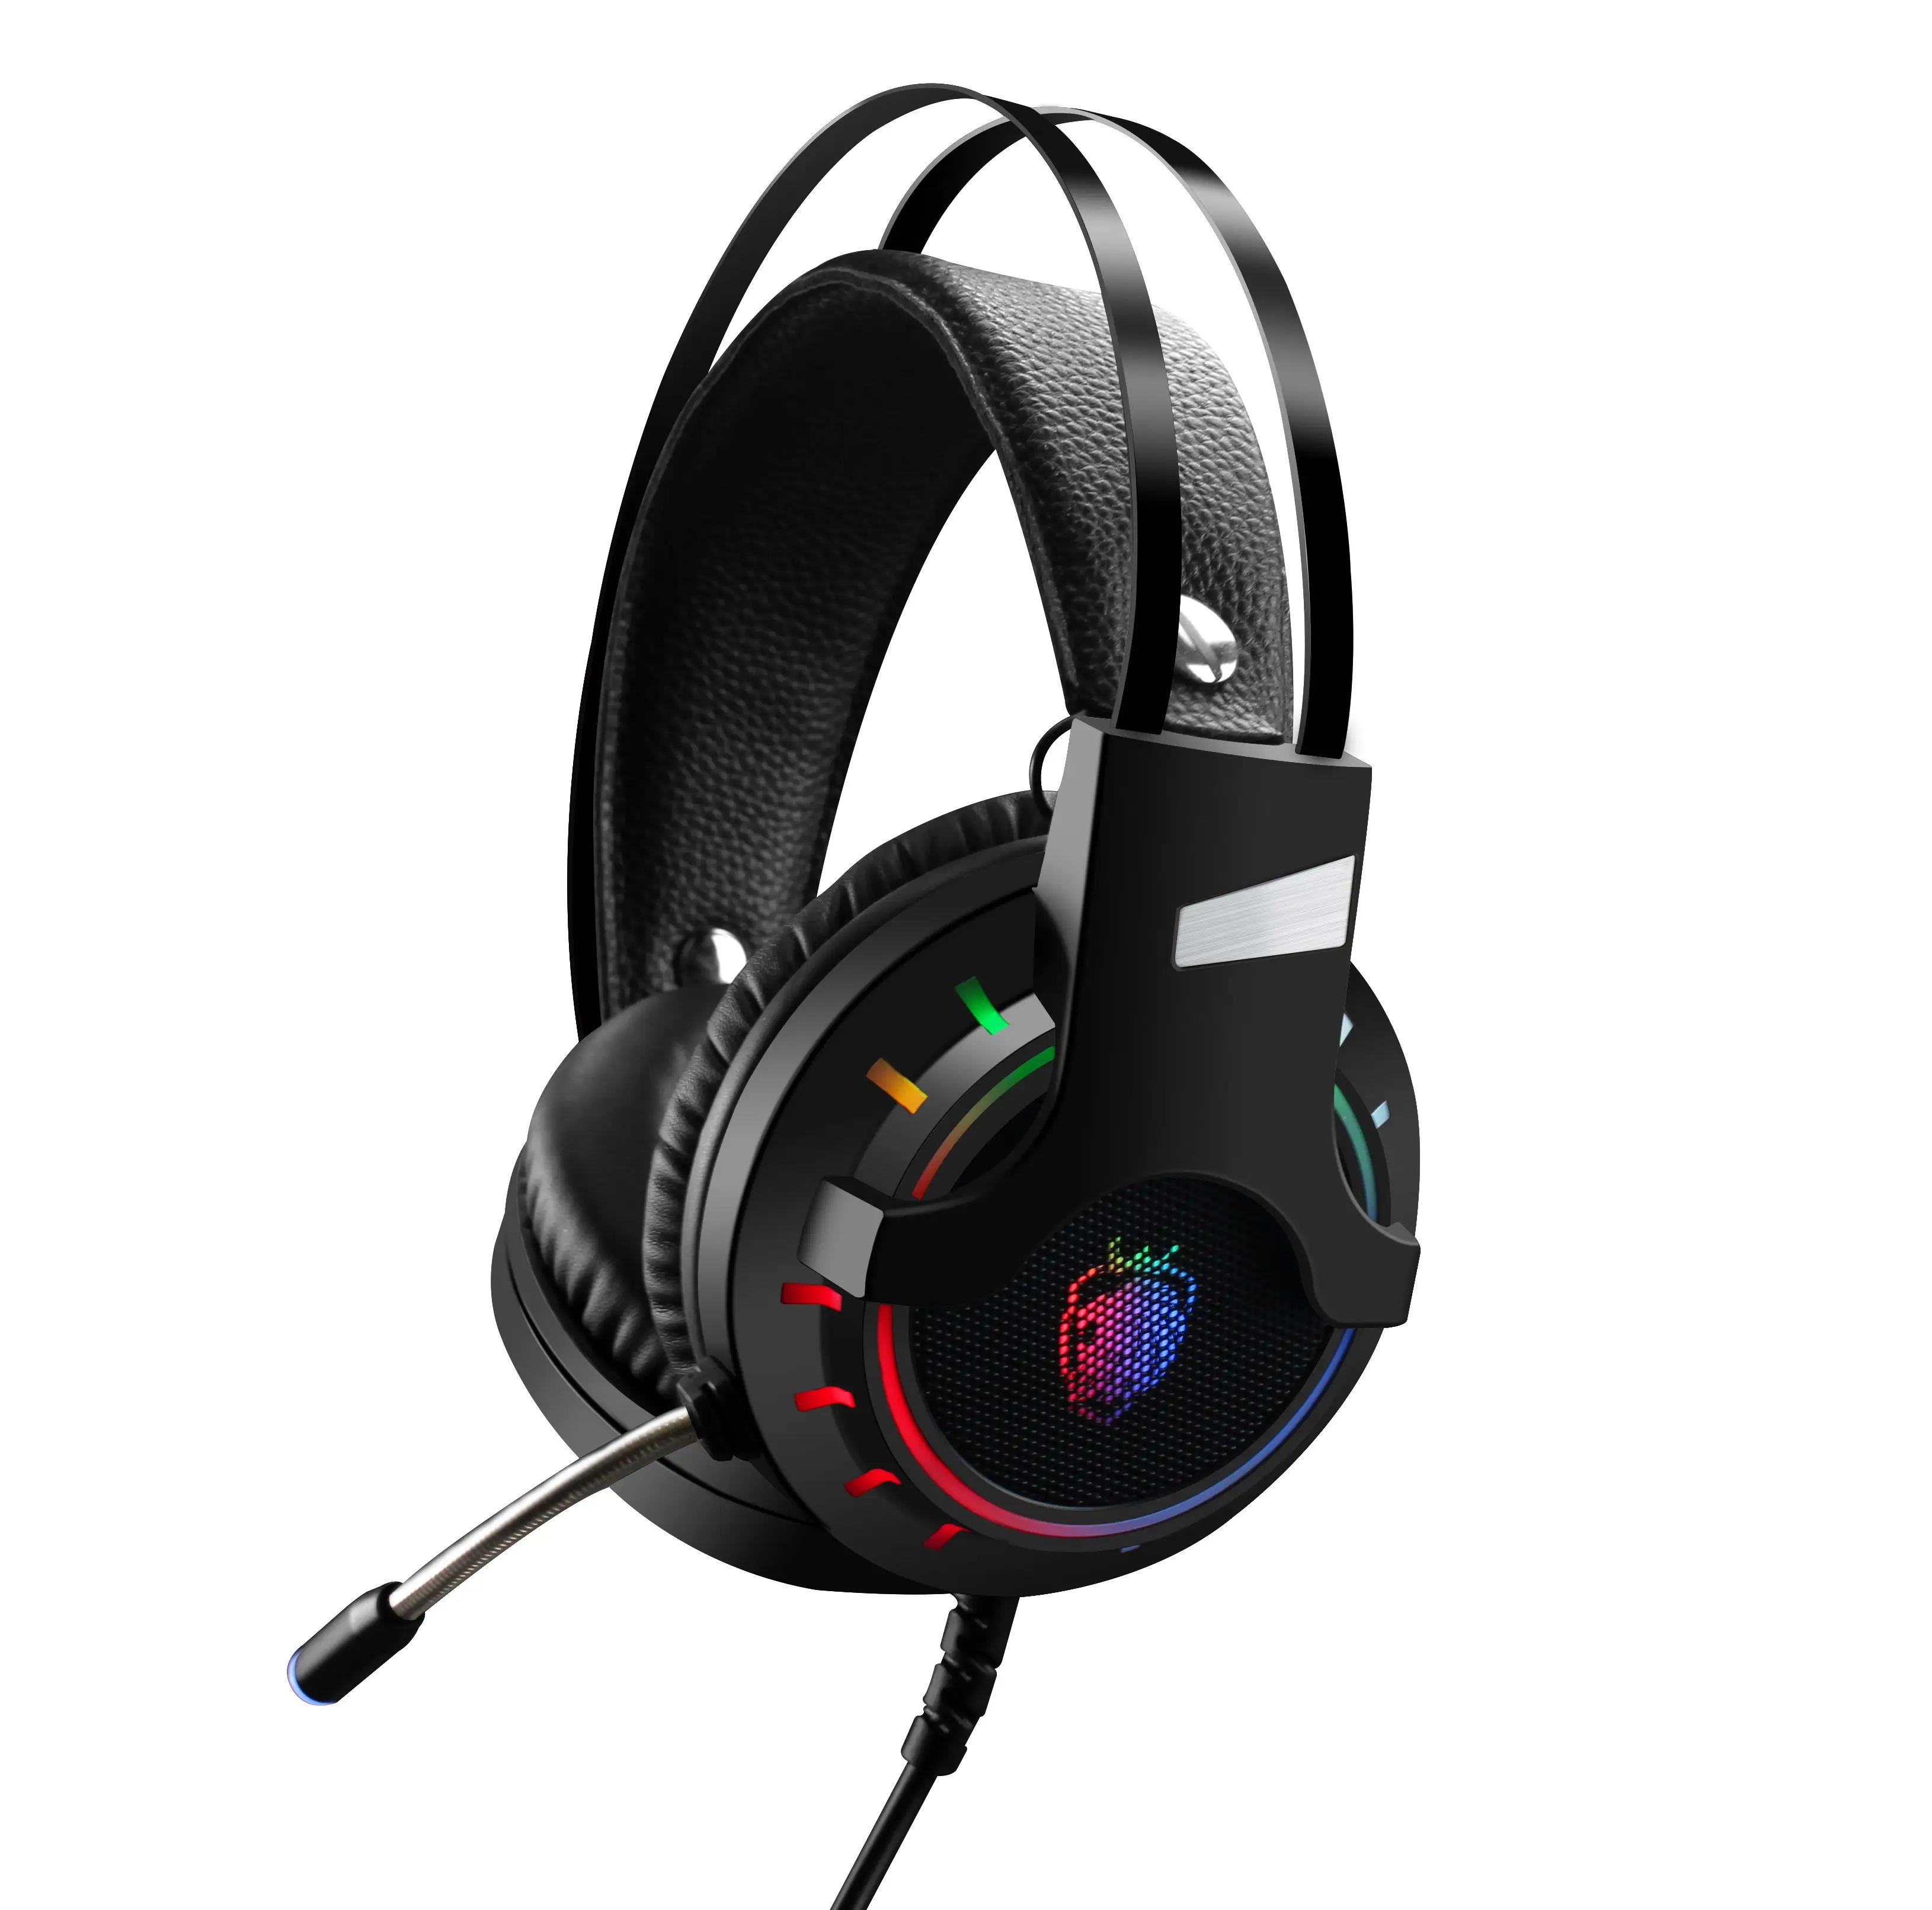 HG8 High Quality Earphone Game headphone surround sound RGB LED light gaming headset For PC Computer